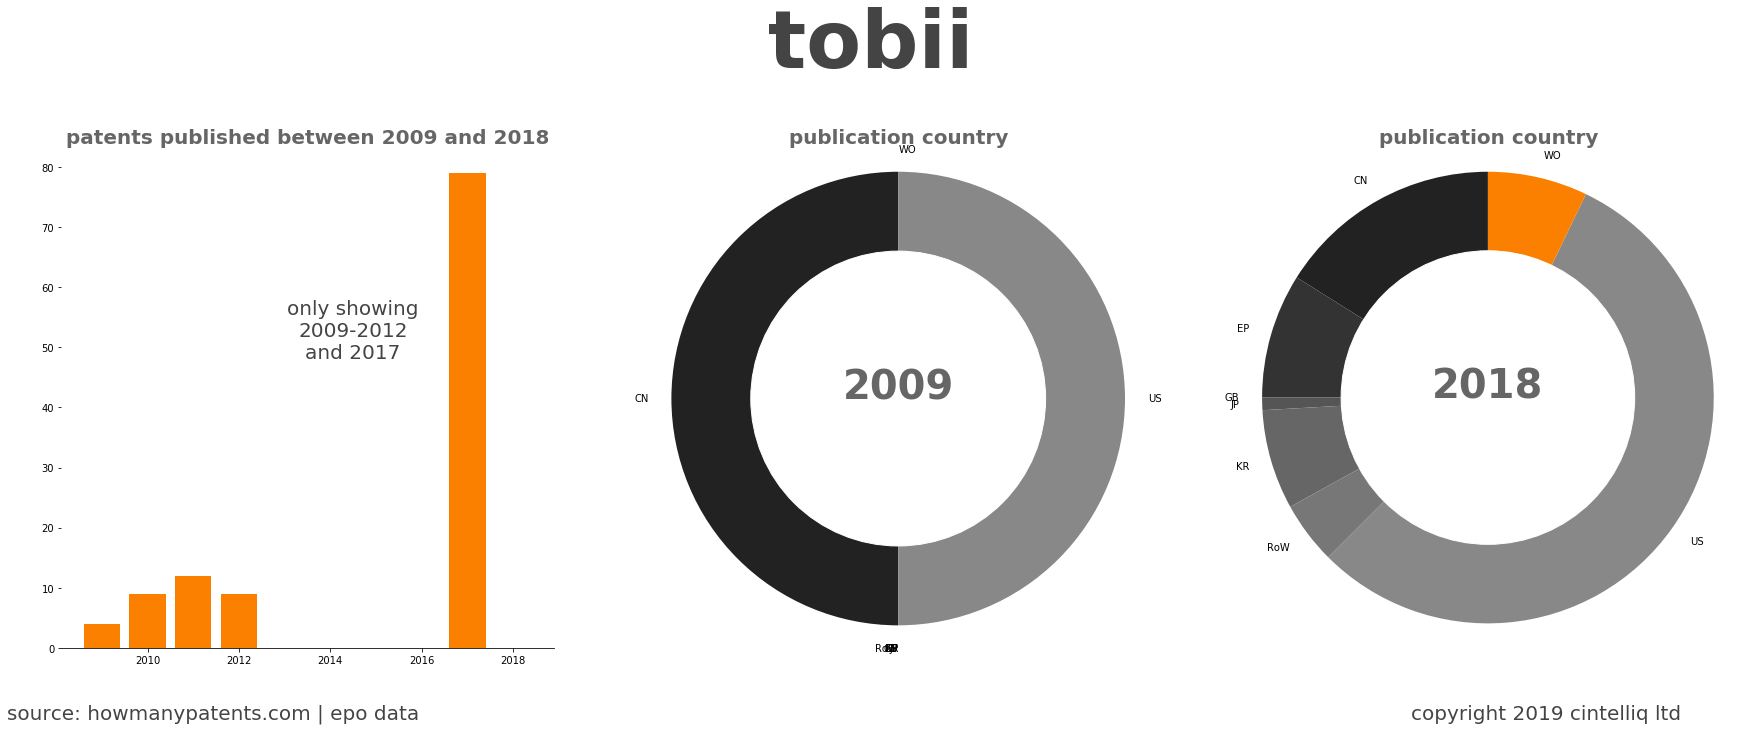 summary of patents for Tobii